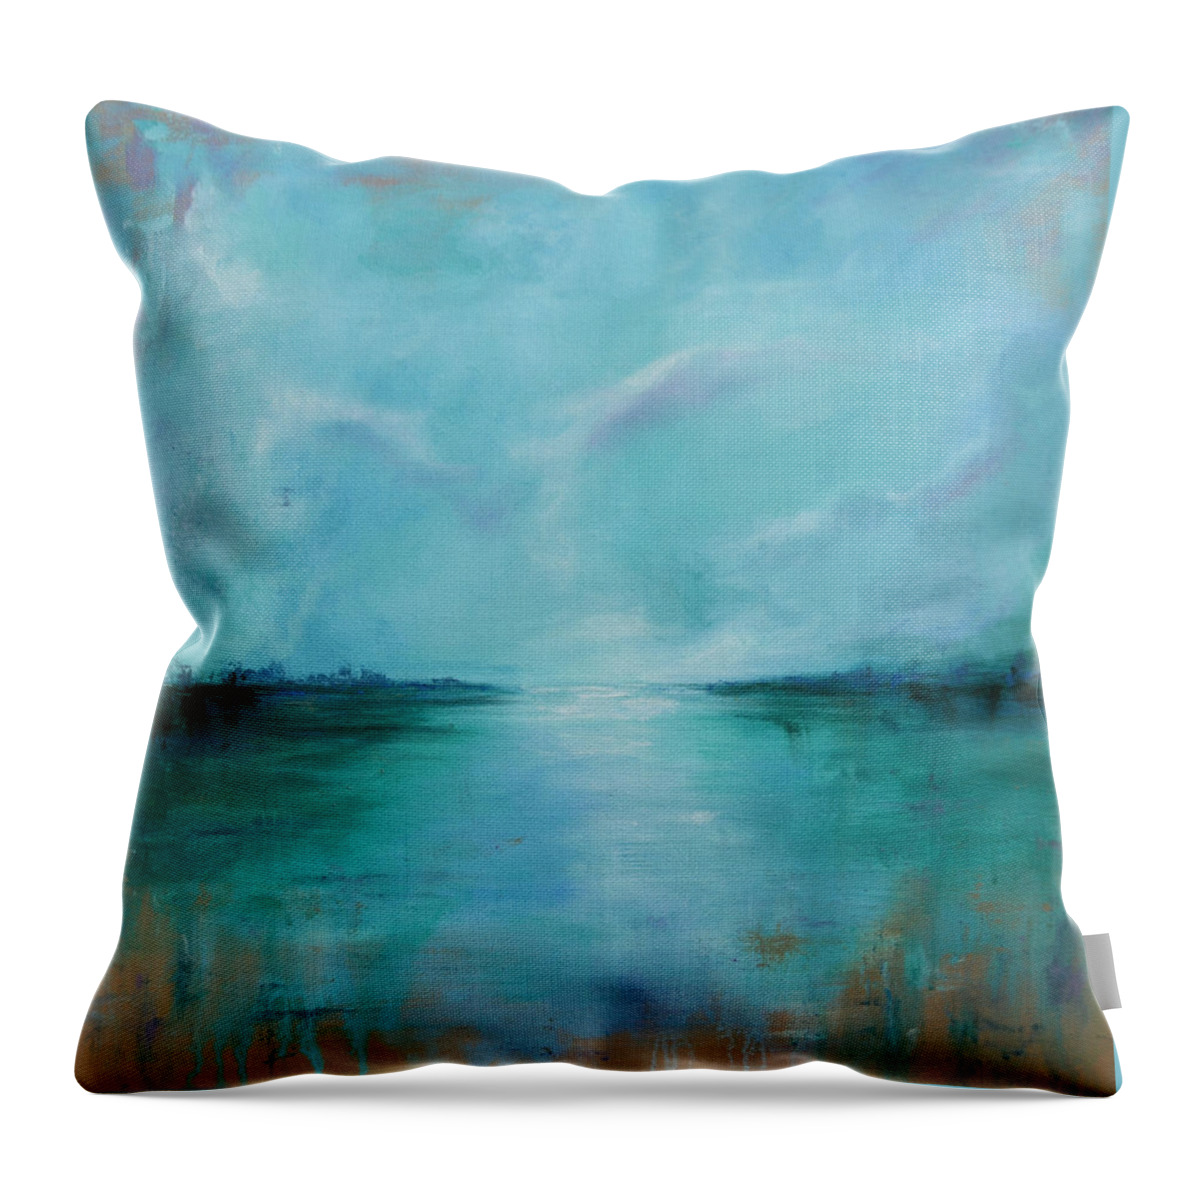 Landscape Throw Pillow featuring the painting Wandering by Joanne Grant